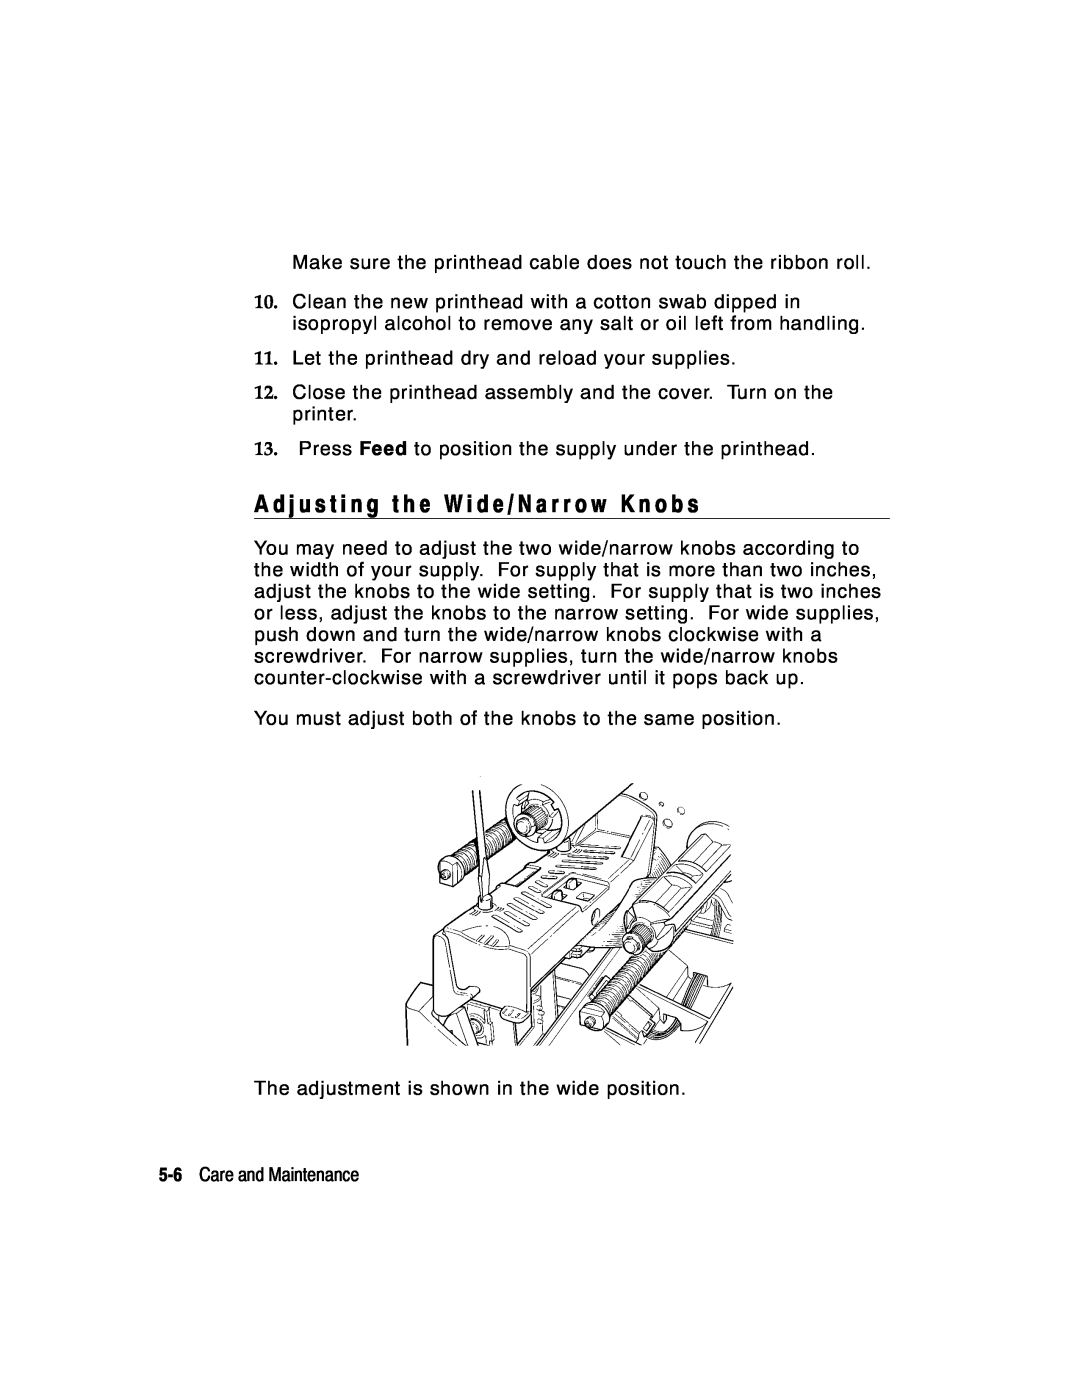 Monarch 9800 manual Let the printhead dry and reload your supplies 